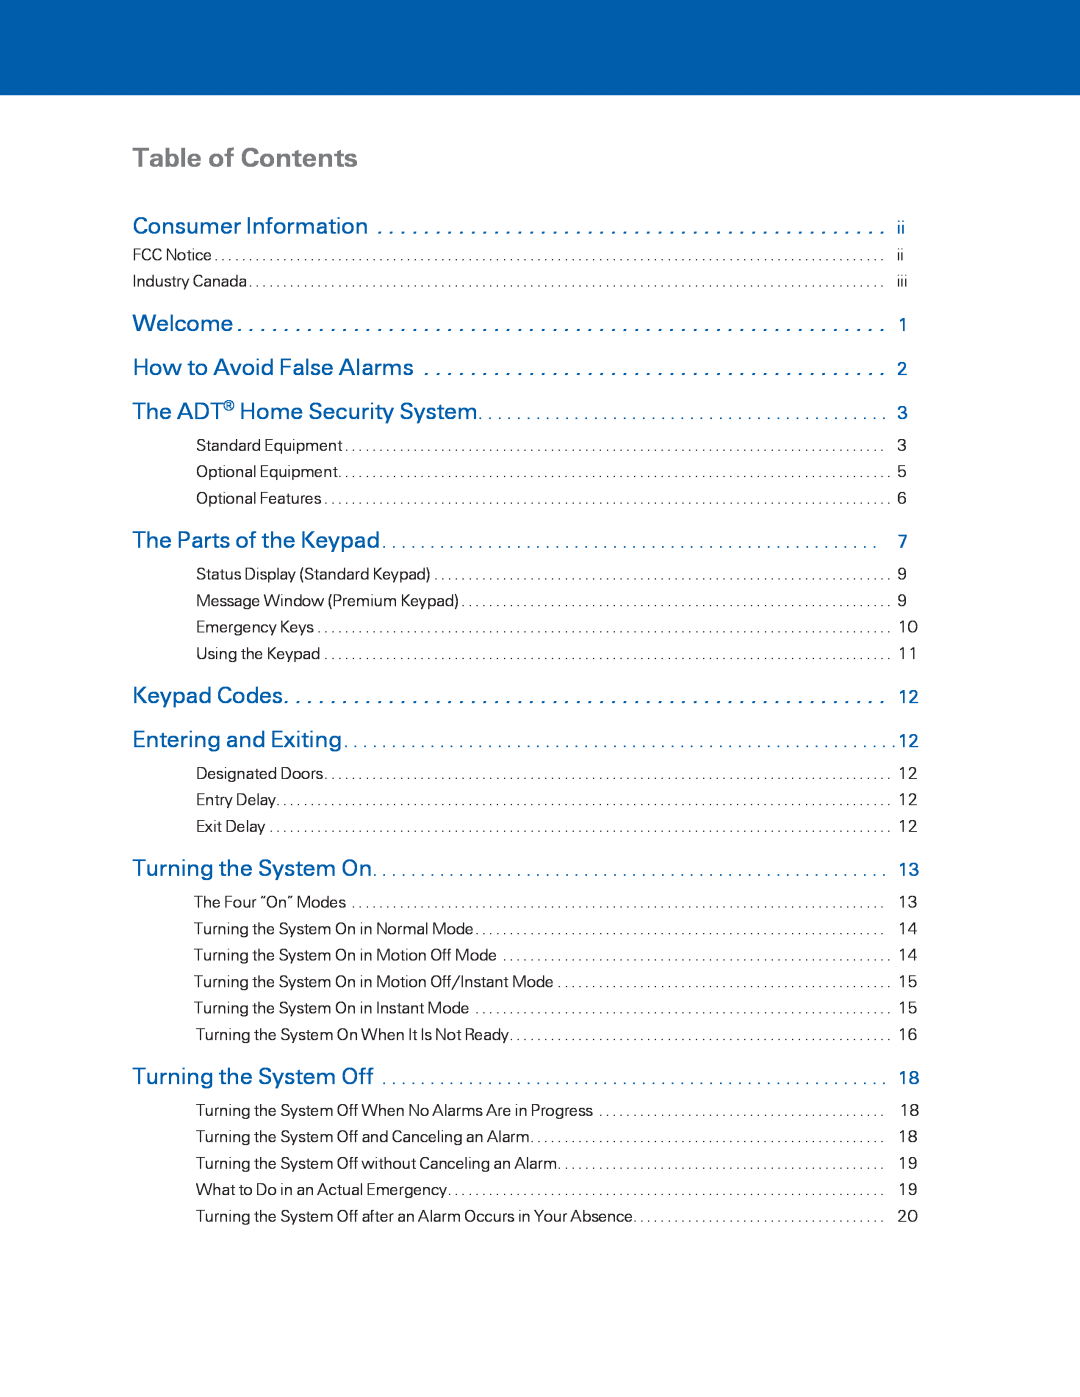 ADT Security Services BHS-4000A user manual Table of Contents, The ADT Home Security System 